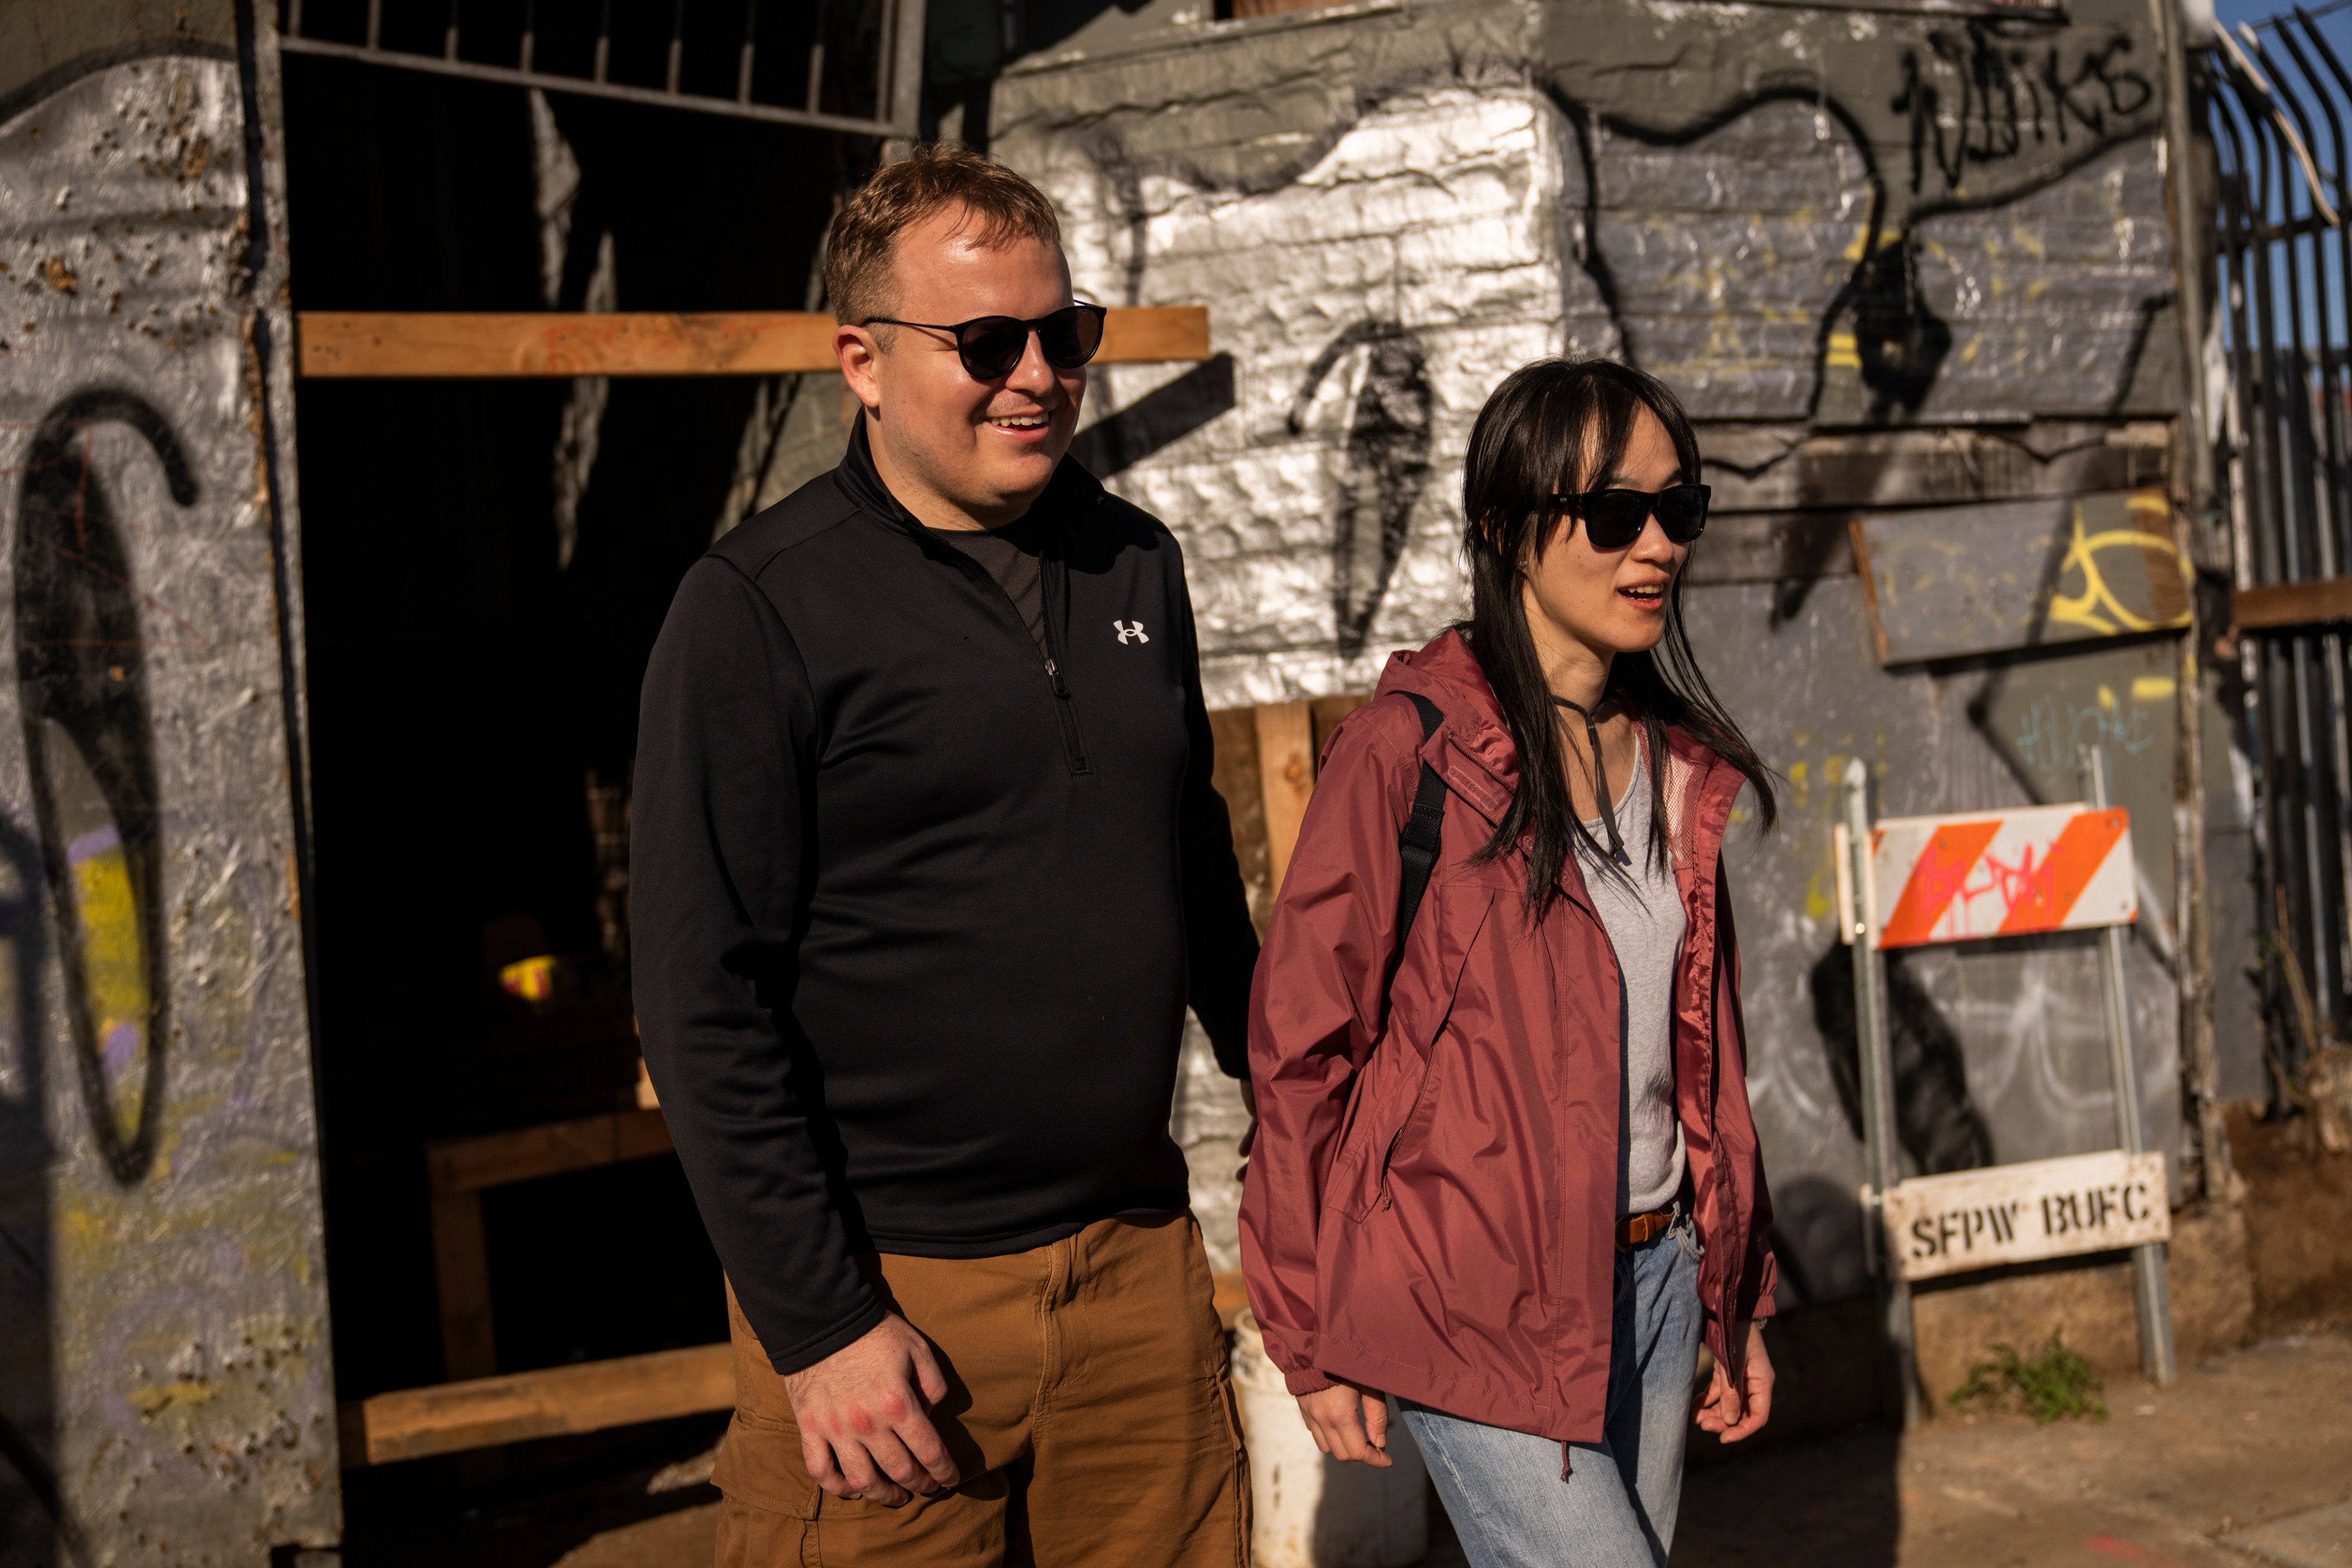 A man and a woman, both wearing sunglasses, walk by graffiti-covered walls in sunlight.